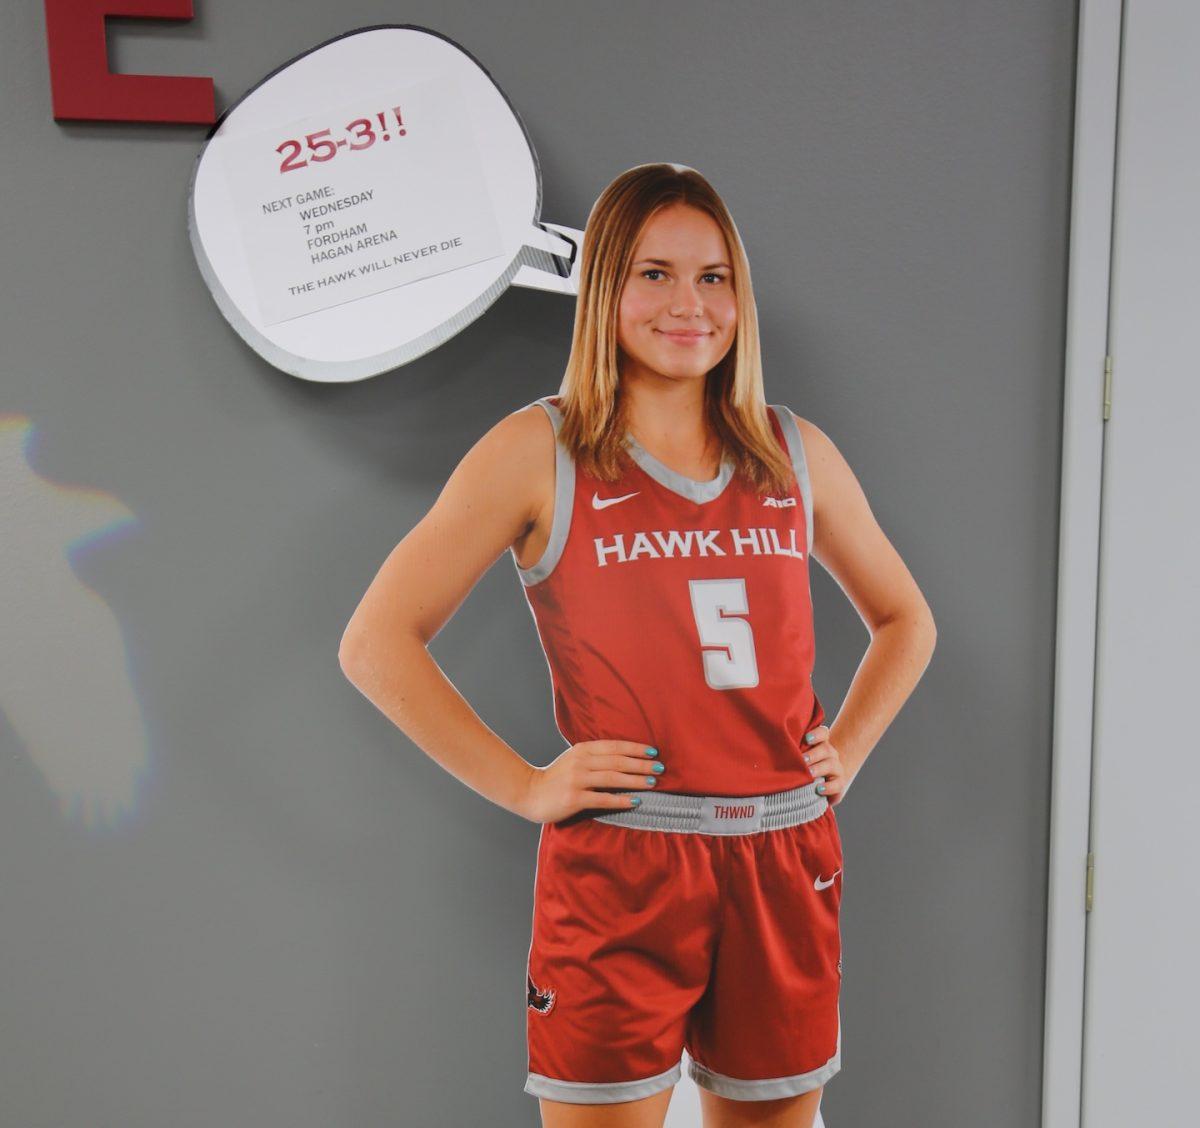 Cutouts of the women’s basketball players have been placed around campus to promote the team. PHOTO: MADELINE WILLIAMS ’26/THE HAWK